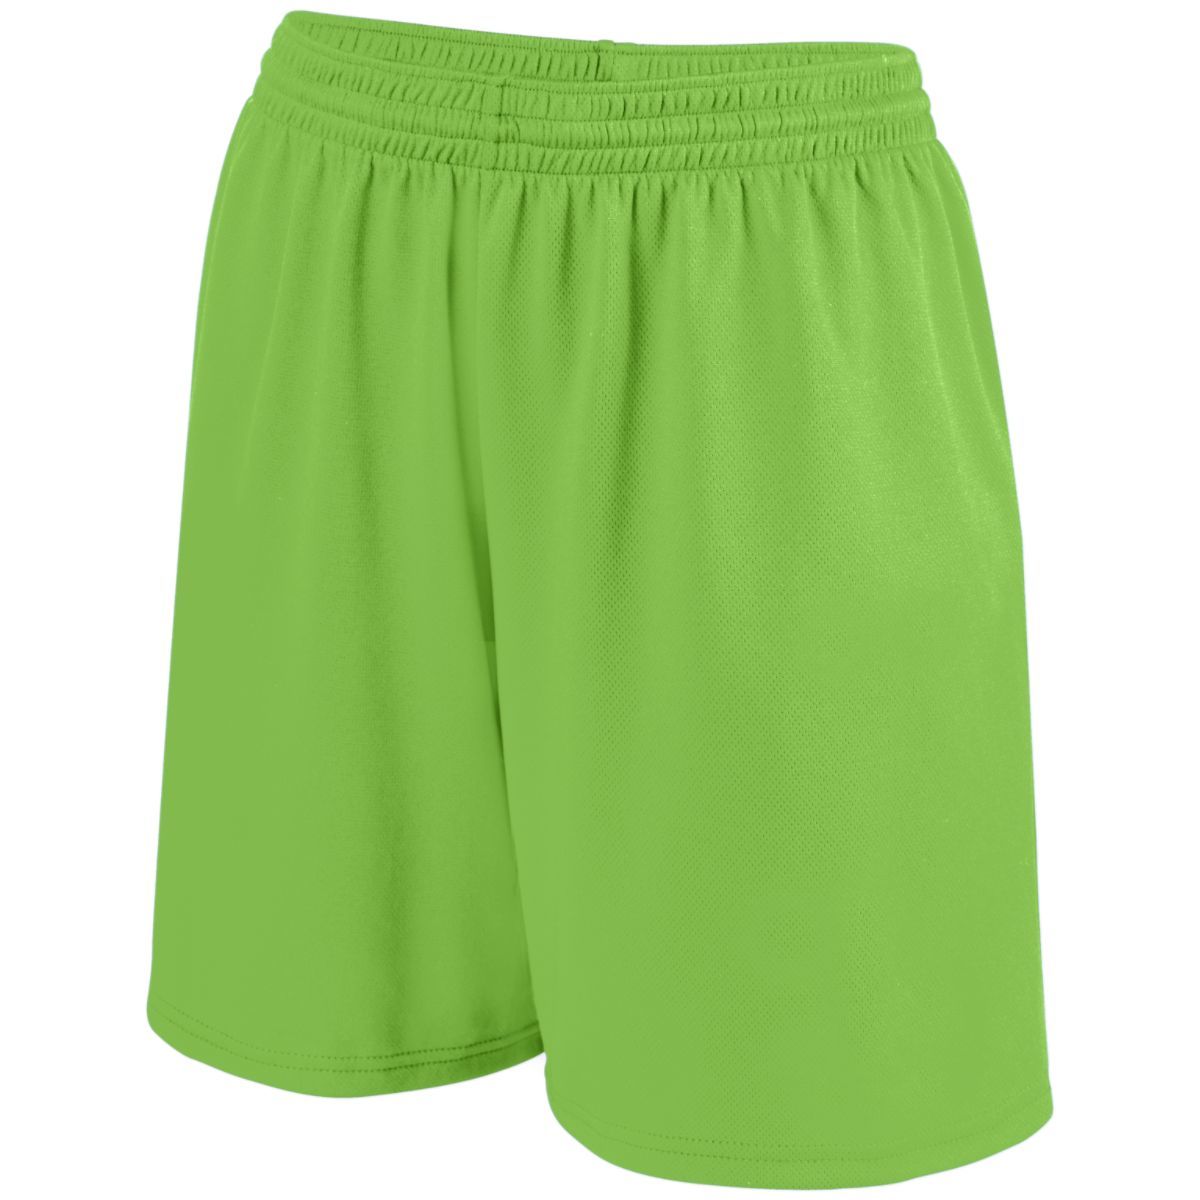 Augusta Sportswear Ladies Shockwave Shorts in Lime/White  -Part of the Ladies, Ladies-Shorts, Augusta-Products, Softball product lines at KanaleyCreations.com